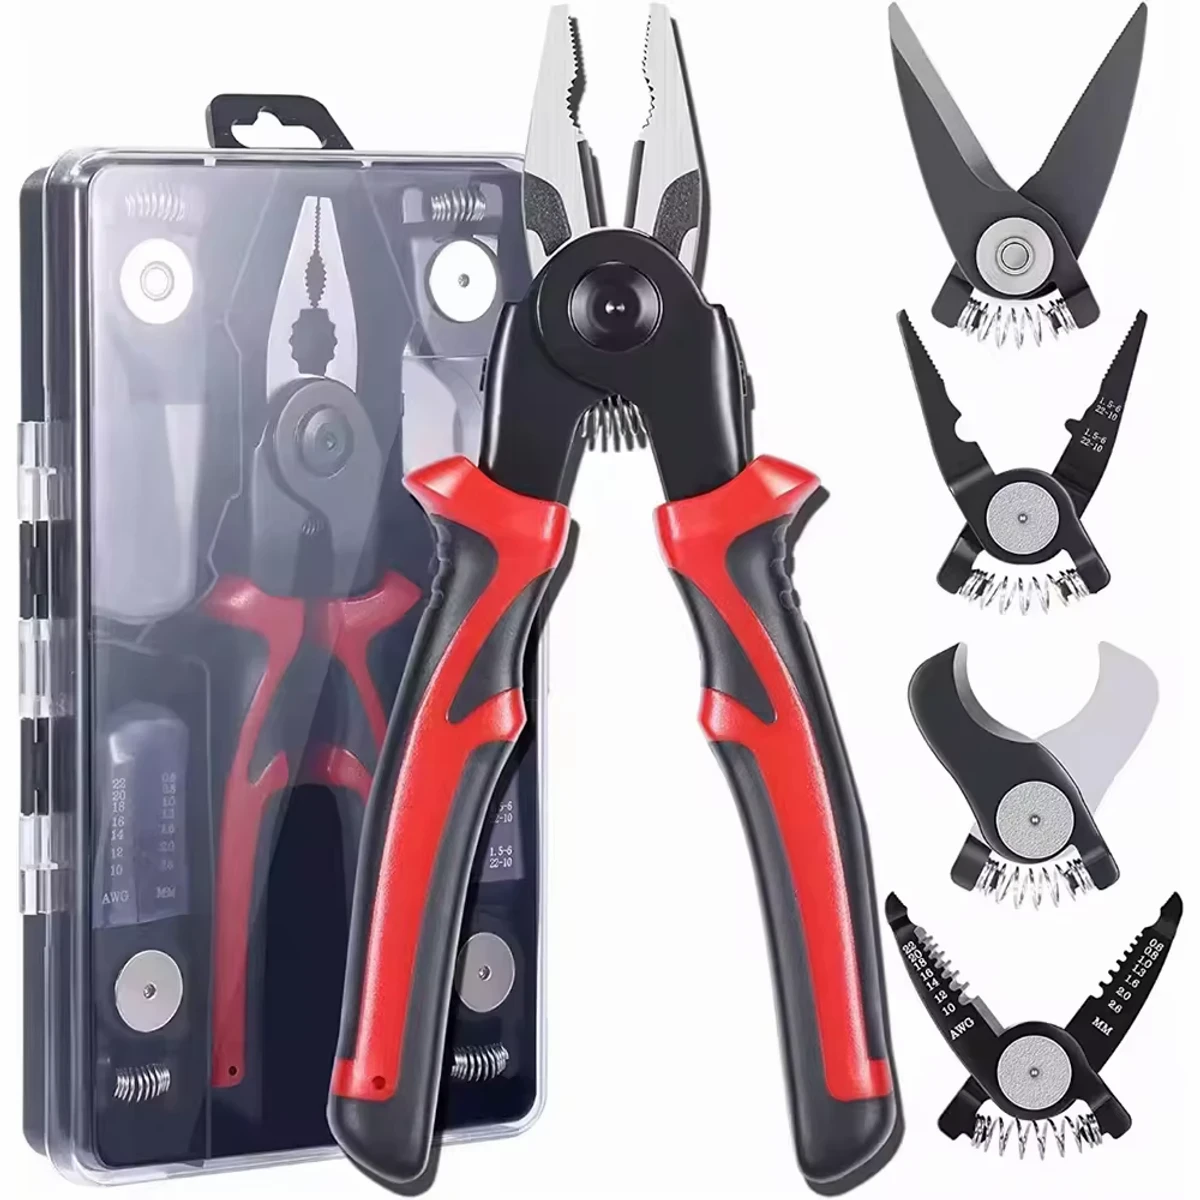 Easy & Fast Multifunctional 5 In 1 Replaceable Tools Set